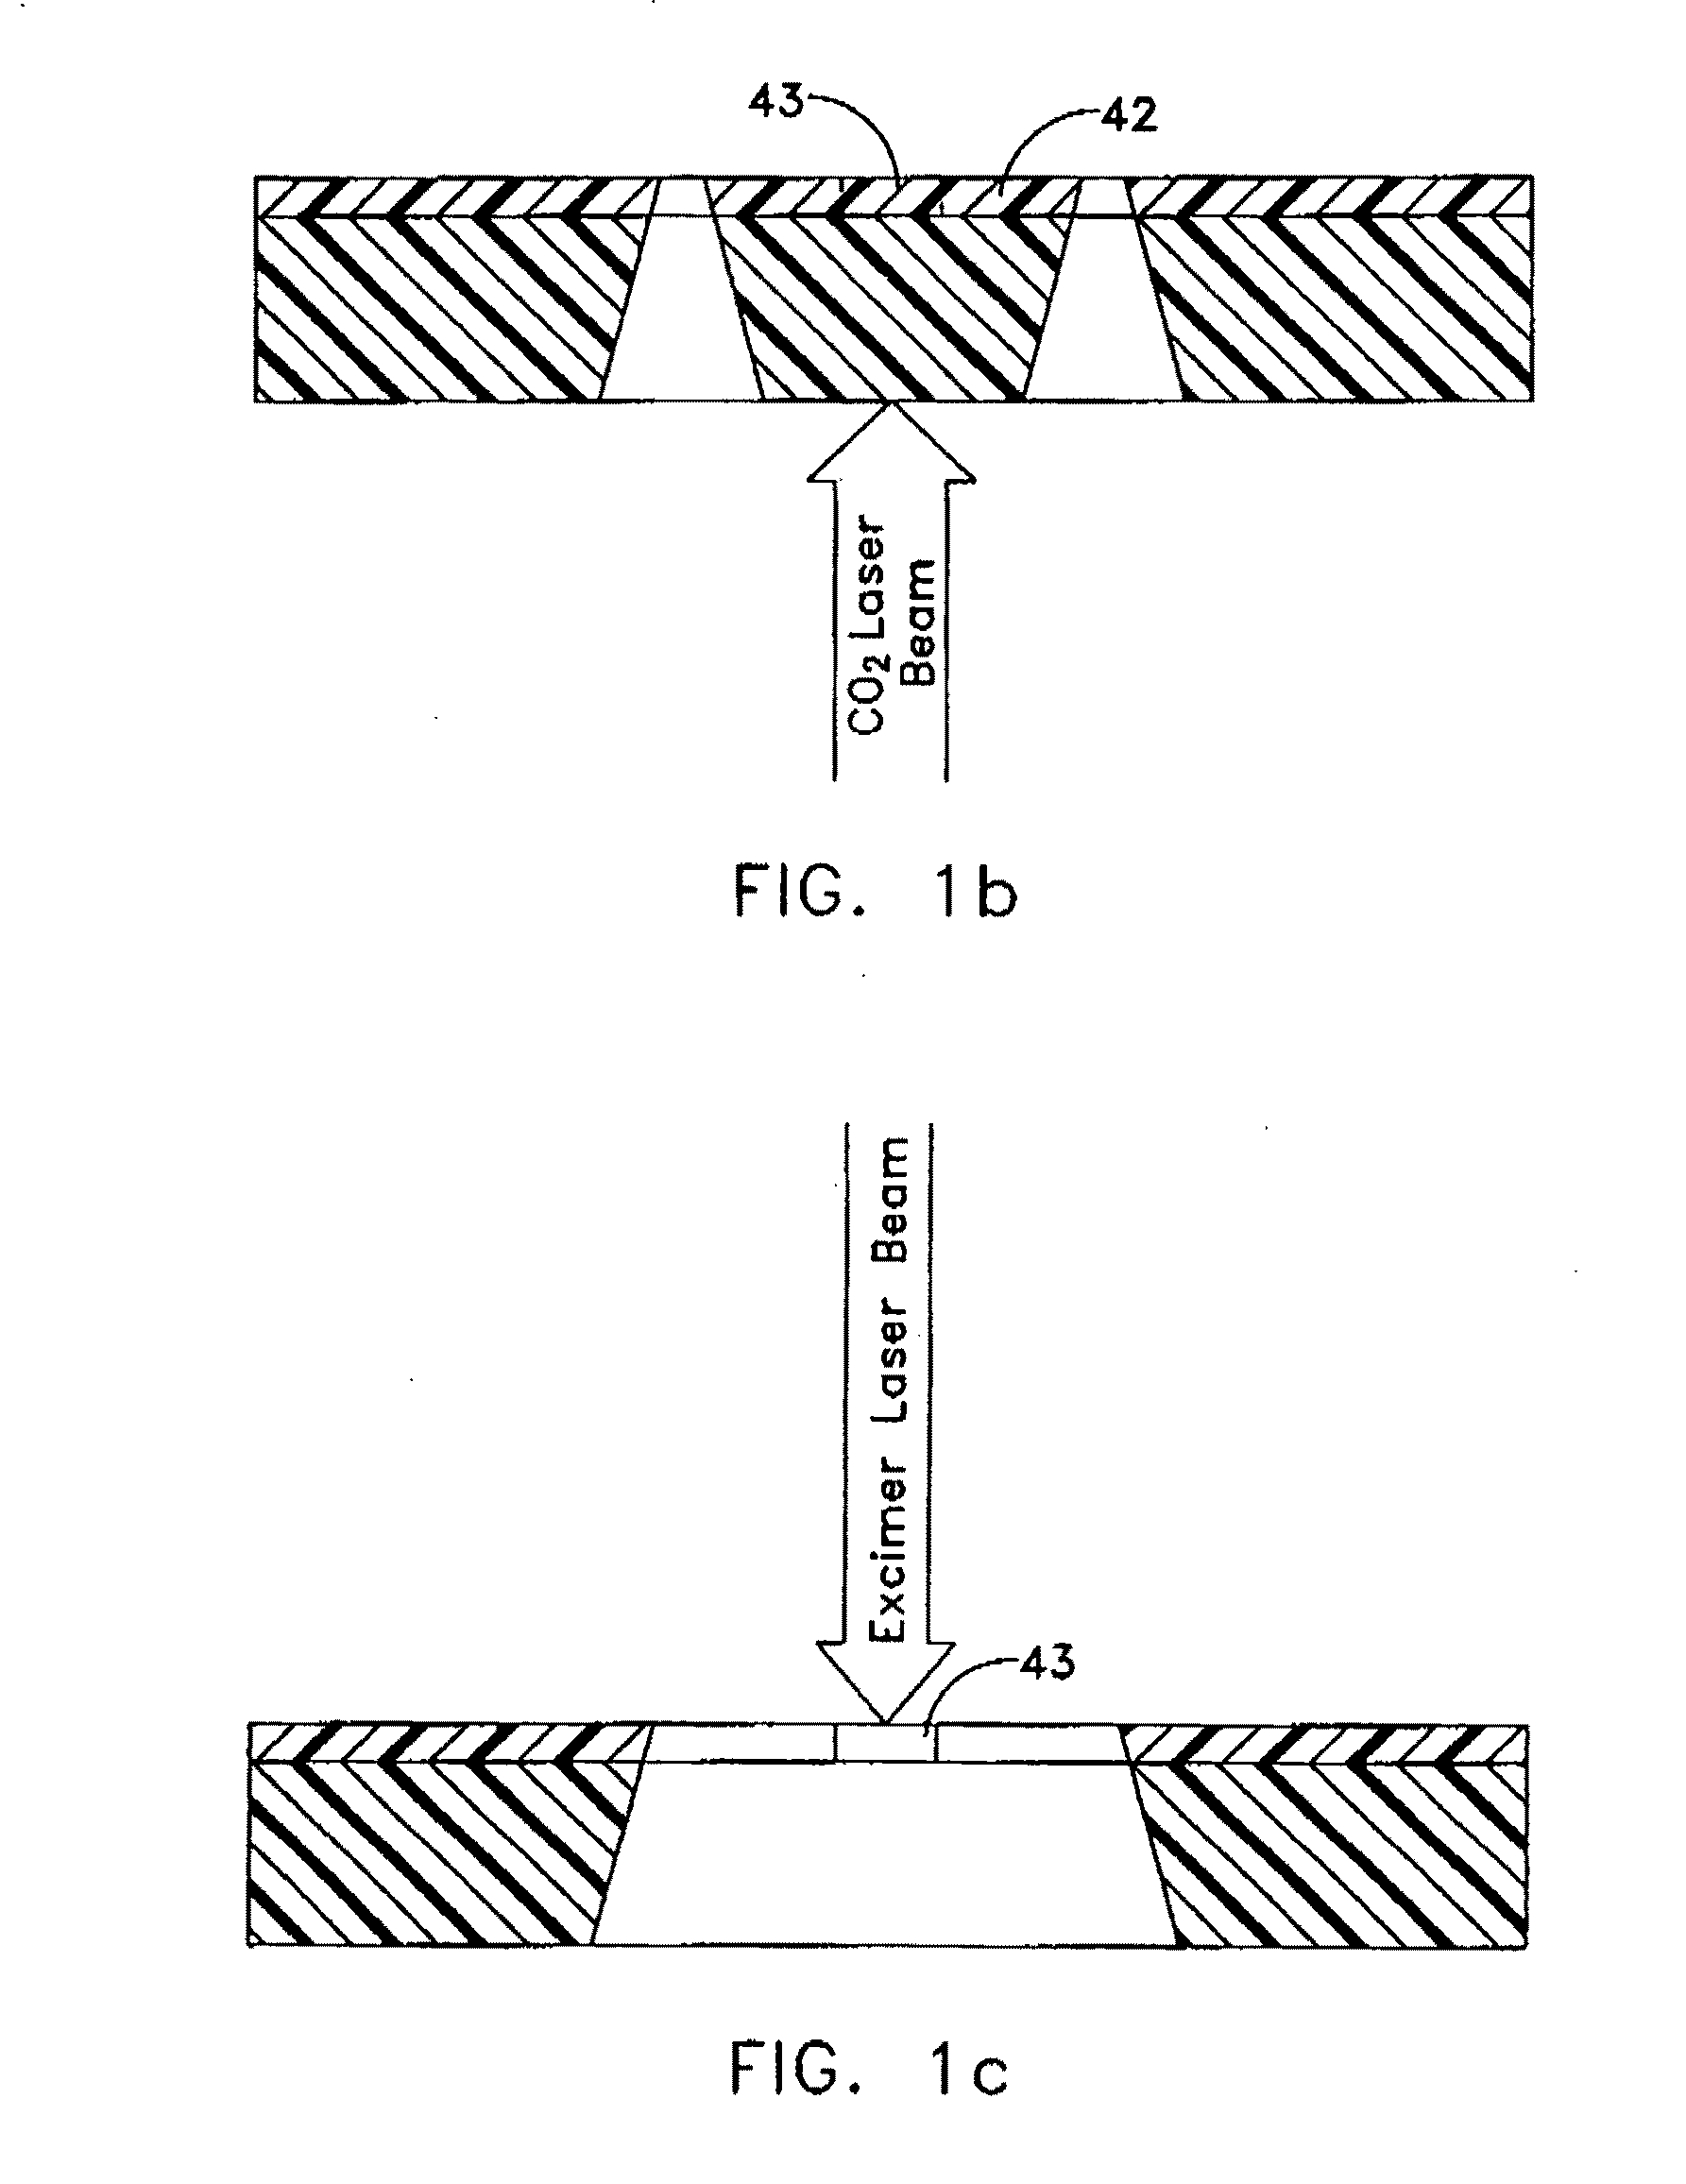 Polyimide substrate bonded to other substrate